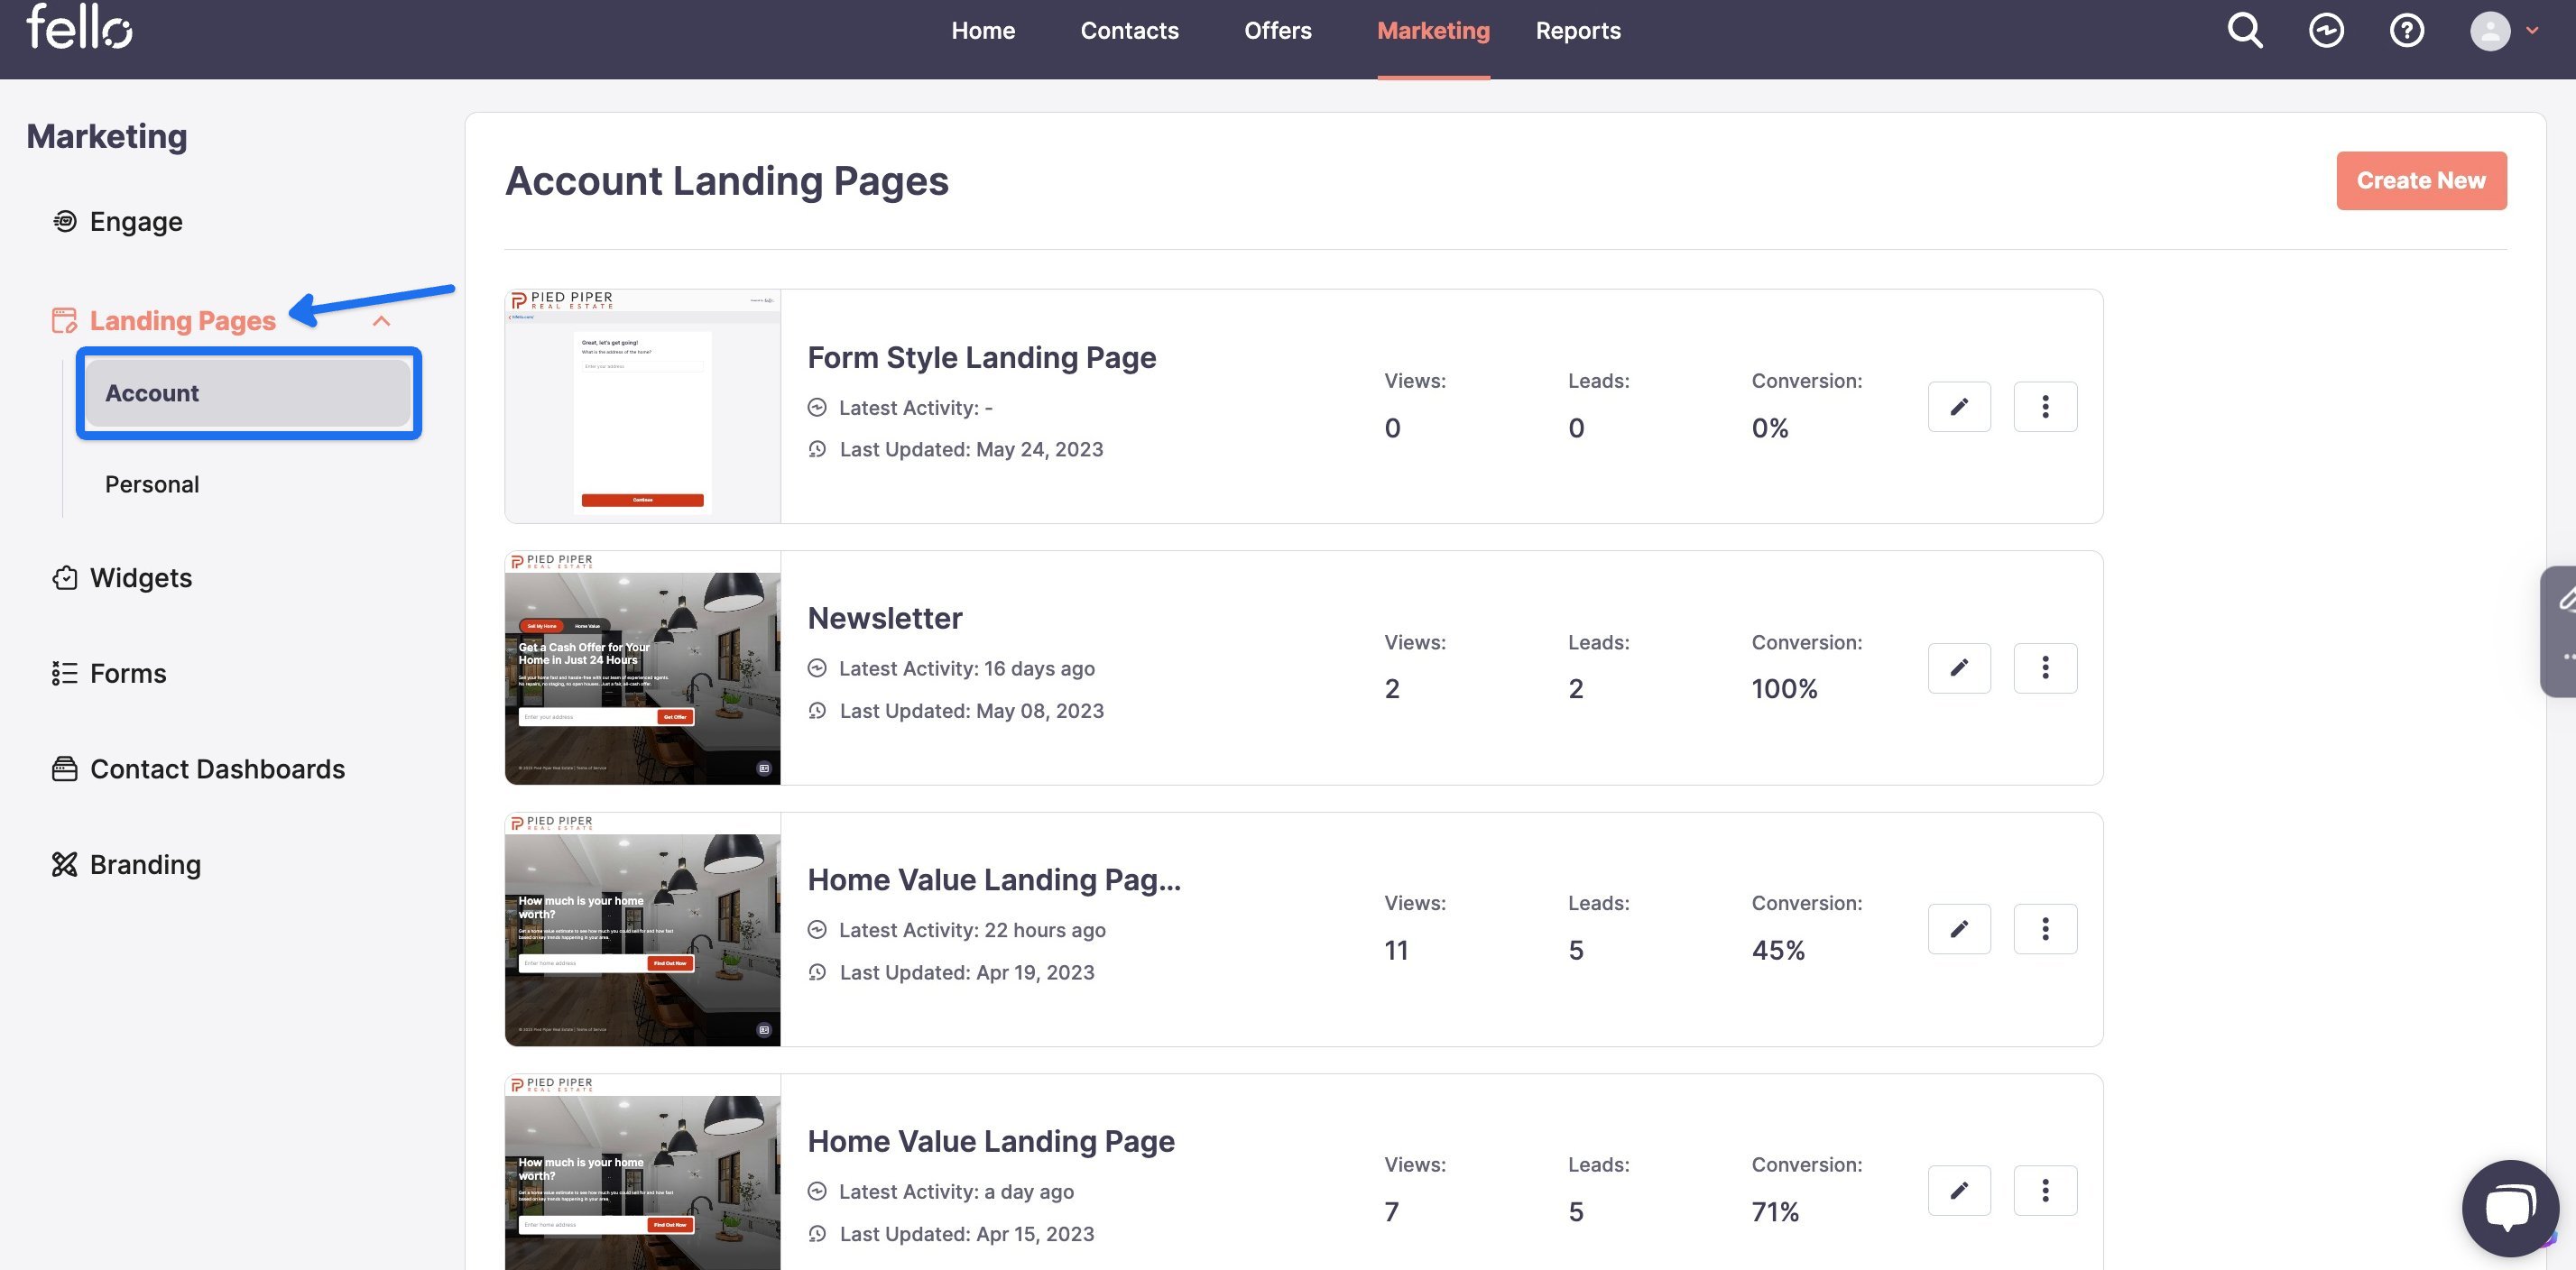 Accounts under Landing Pages in the left pane of marketing tab